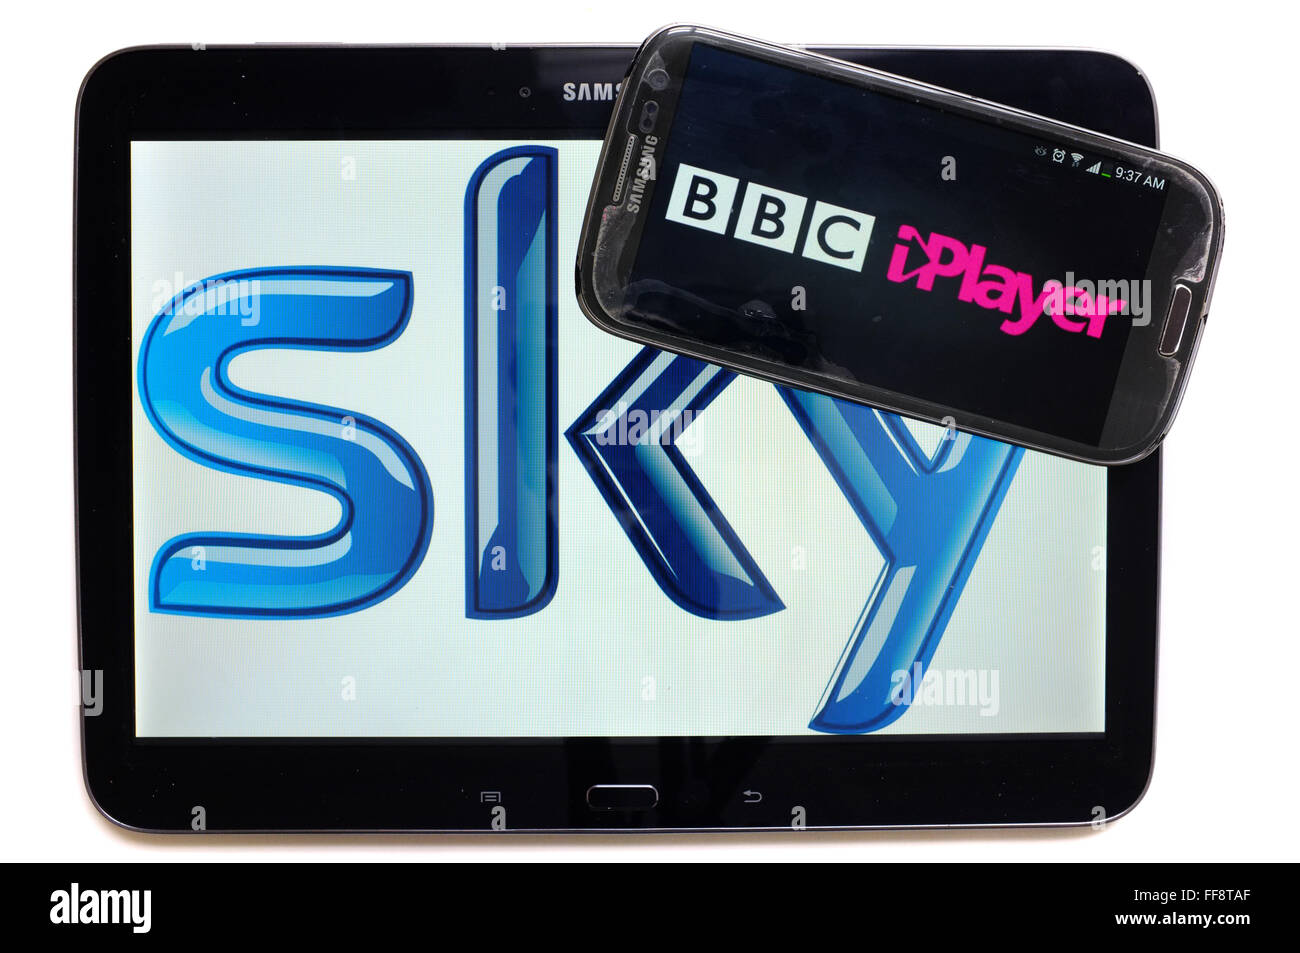 The BBC iPlayer logo on a smartphone screen on top of a tablet displaying the Sky logo photographed against a white background. Stock Photo